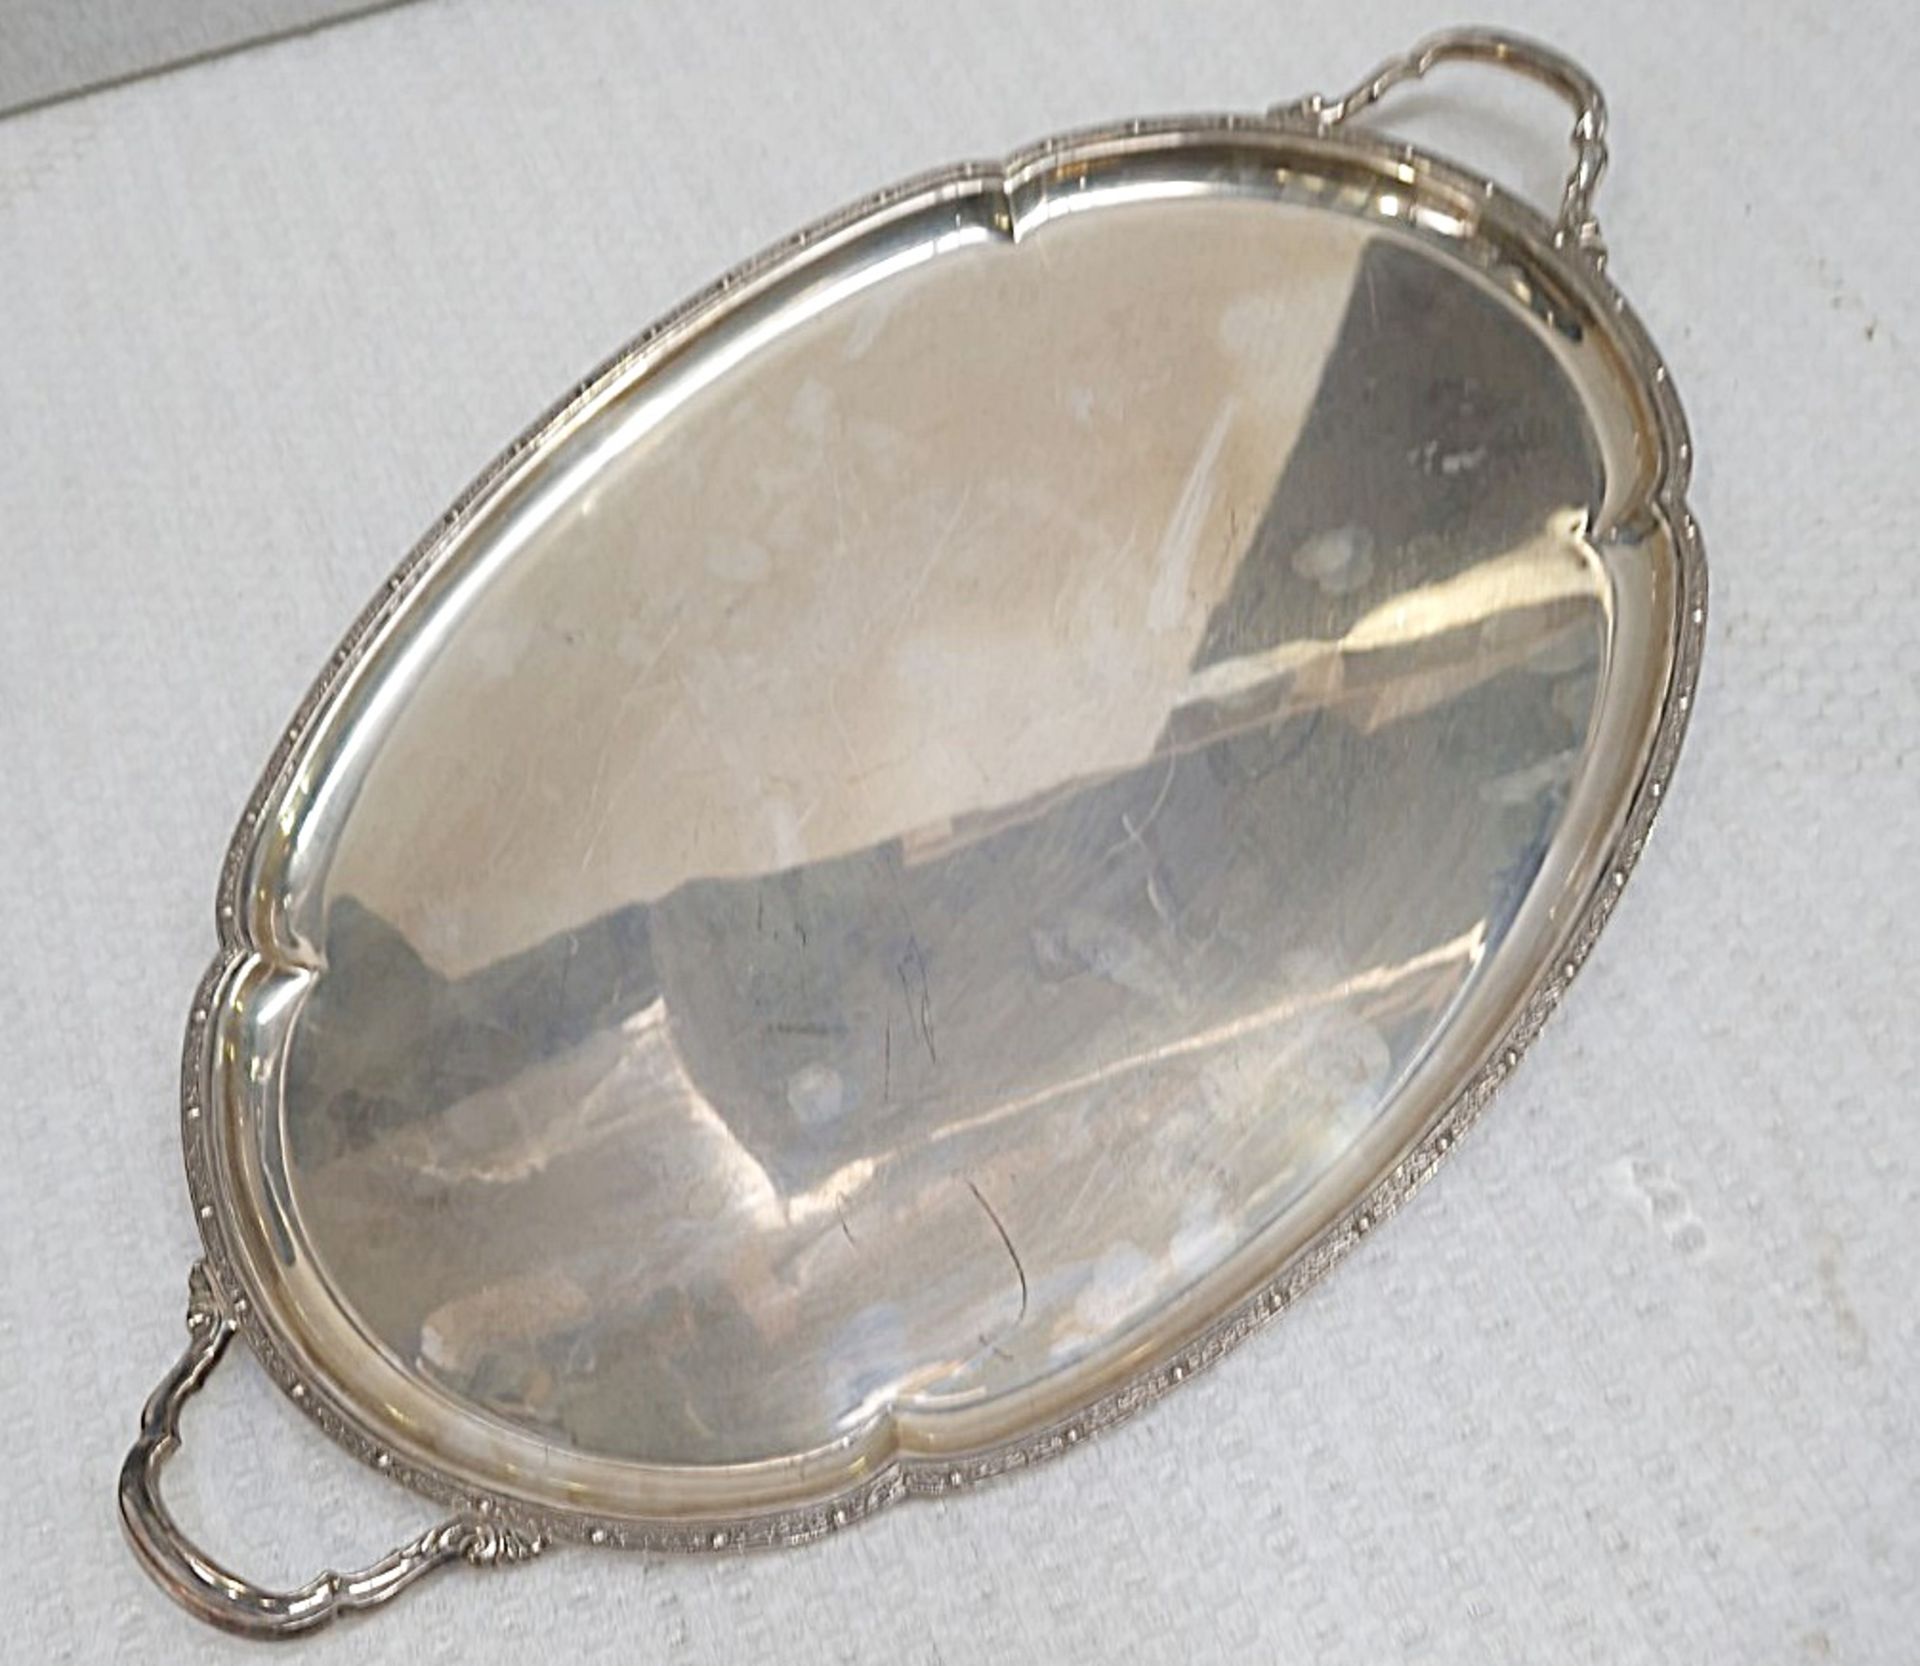 1 x FRANK COBB Silver Shaped Oval Tray with Handles & Vintage Rosenthal Mocha-Demitasse 50cm - Image 6 of 6